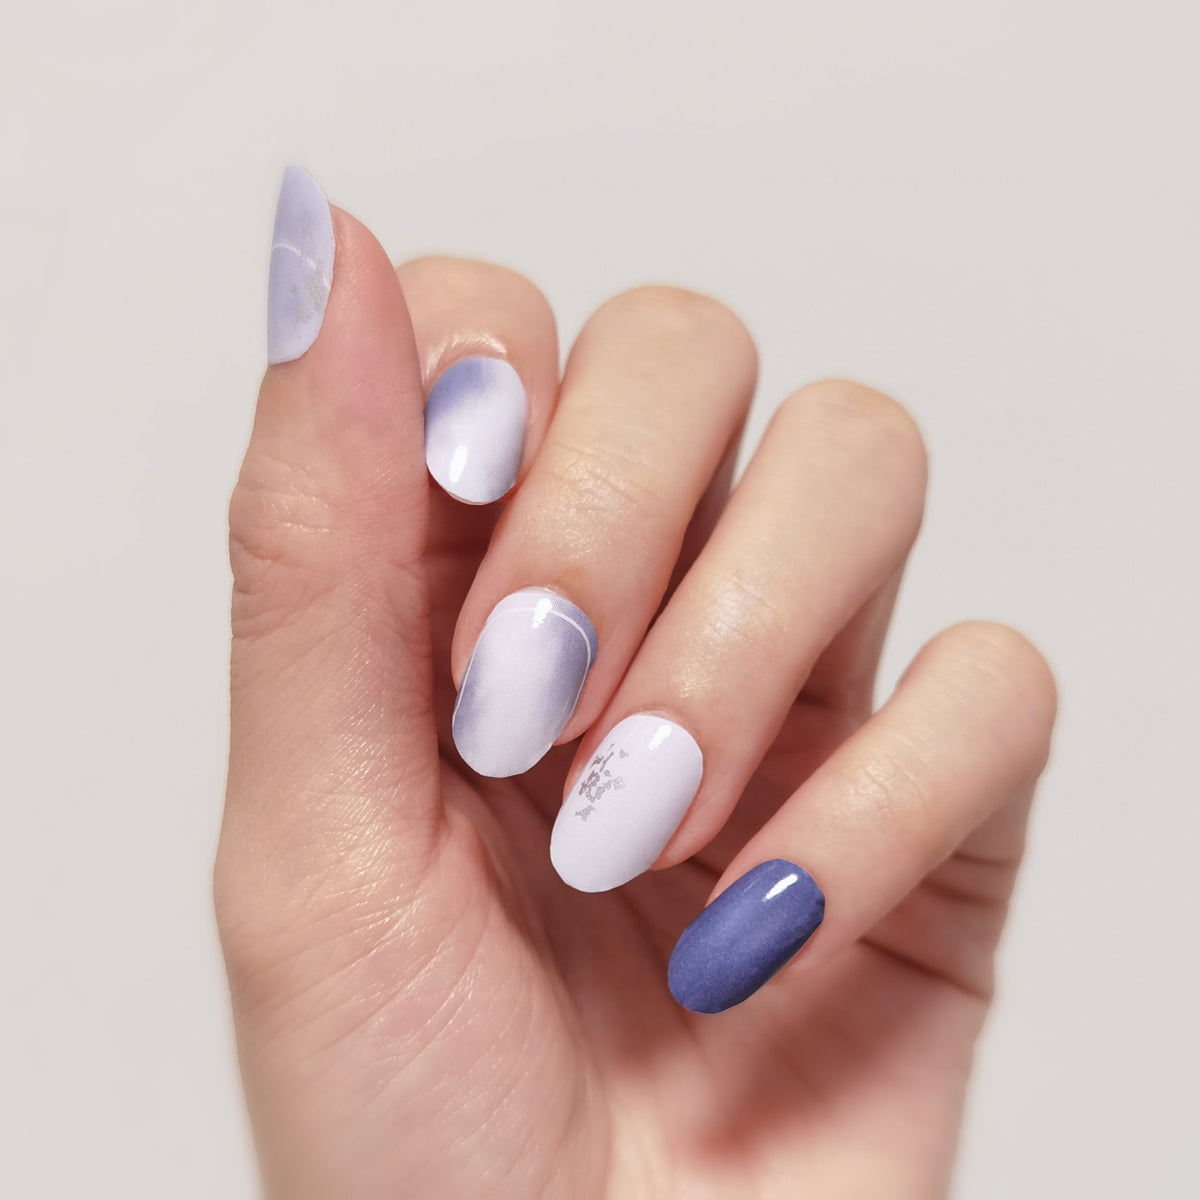 Buy Kianna Mist Premium Designer Nail Polish Wraps & Semicured Gel Nail Stickers at the lowest price in Singapore from NAILWRAP.CO. Worldwide Shipping. Achieve instant designer nail art manicure in under 10 minutes - perfect for bridal, wedding and special occasion.